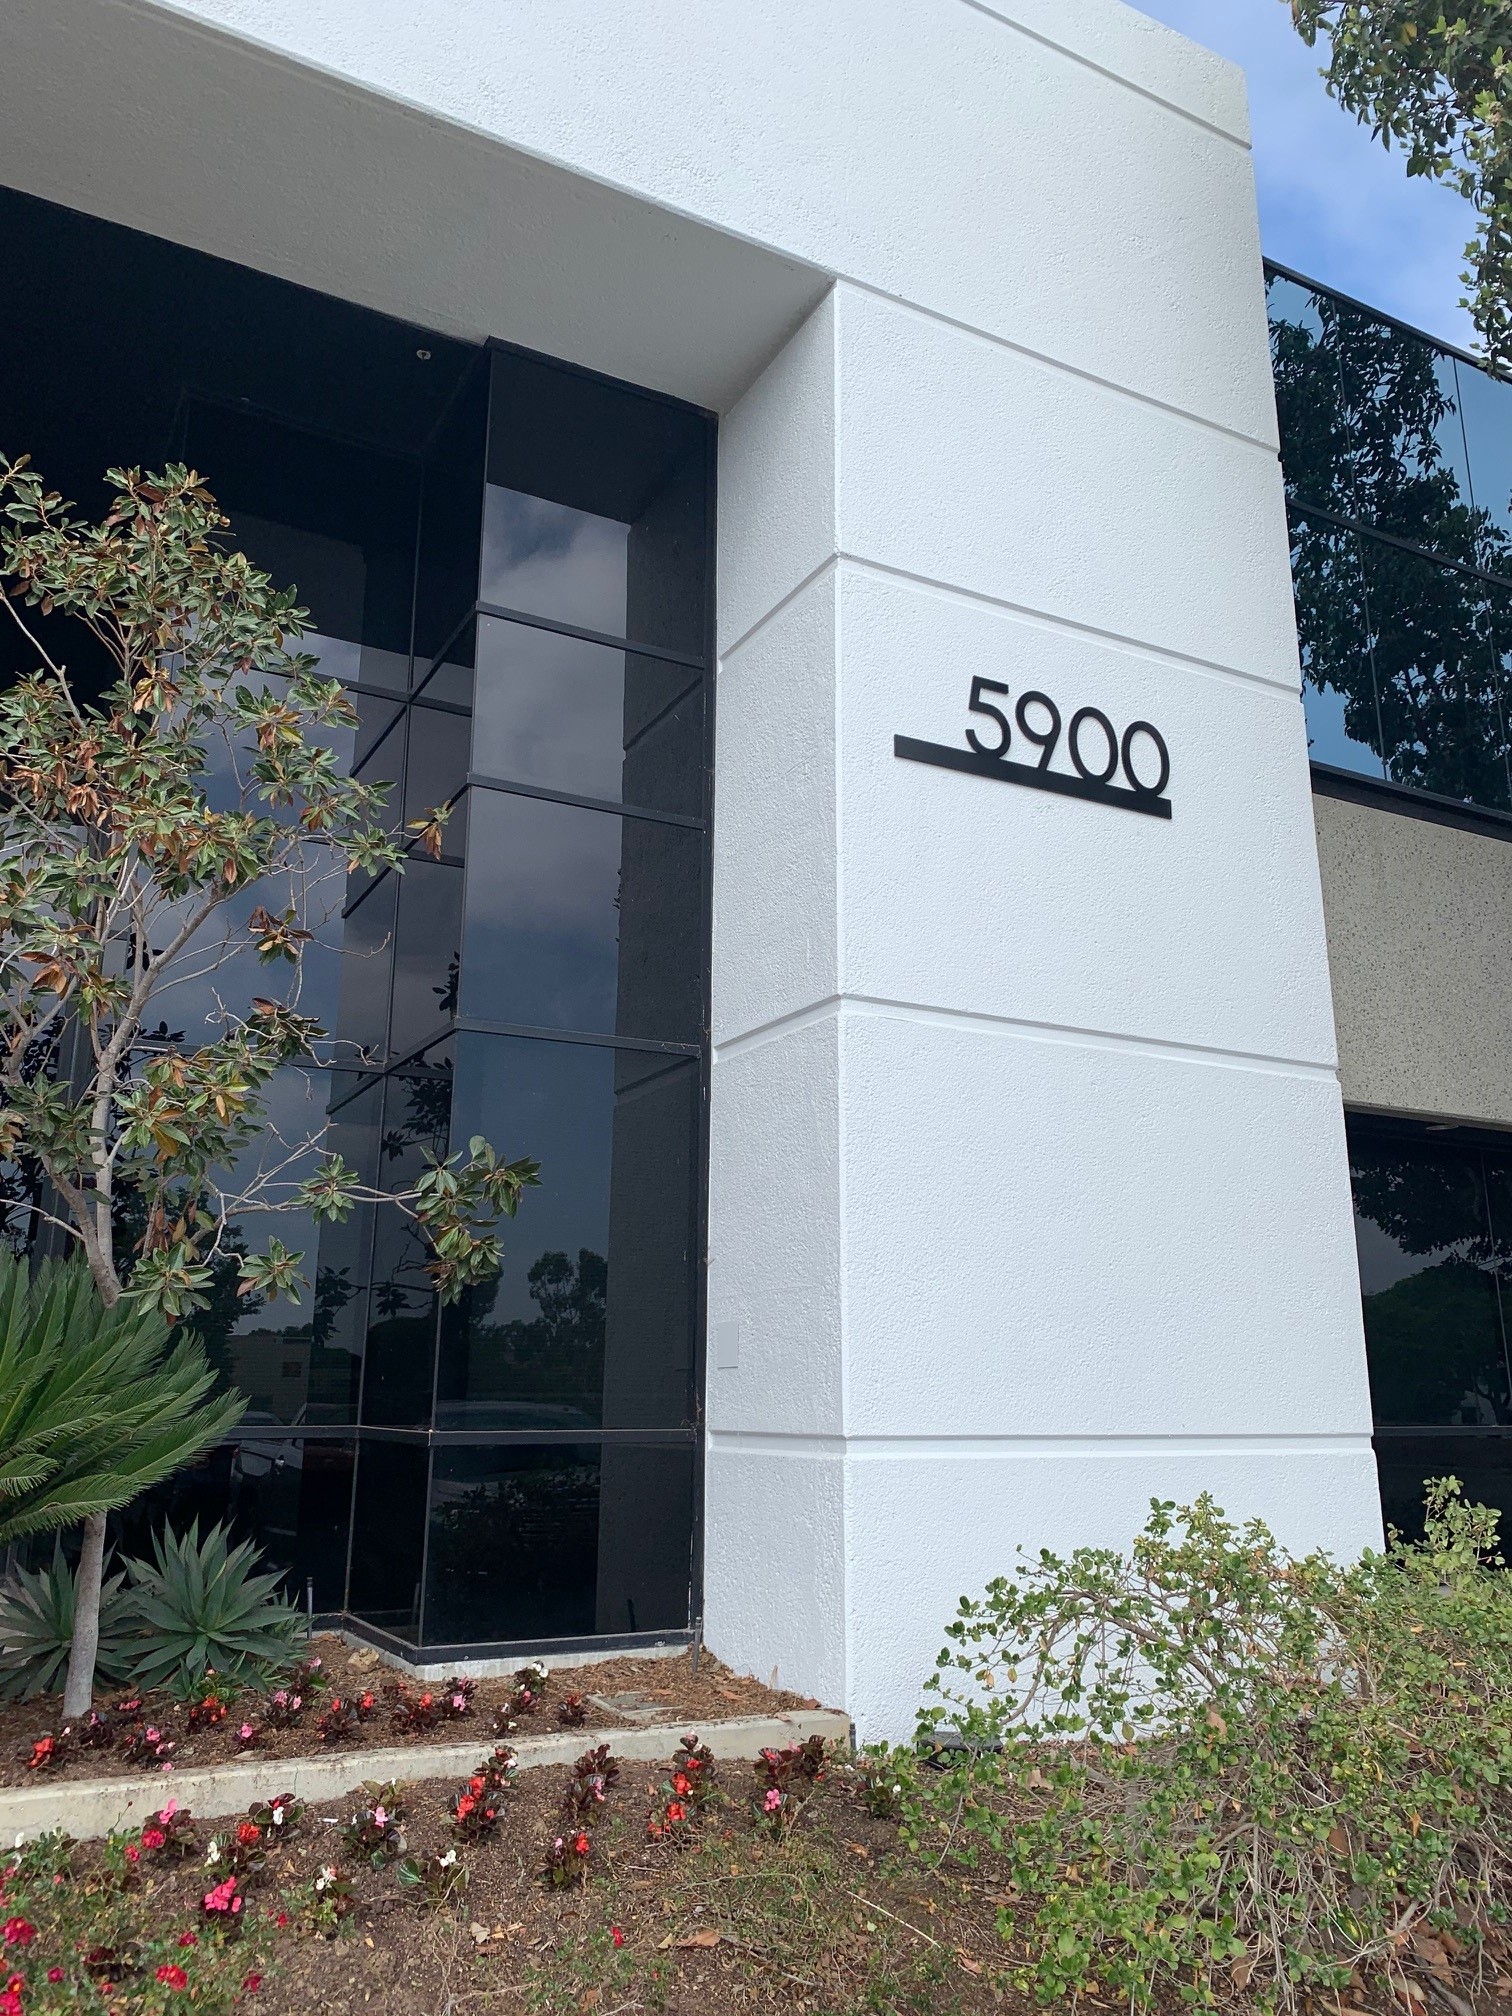 Office complex signs in Carlsbad CA